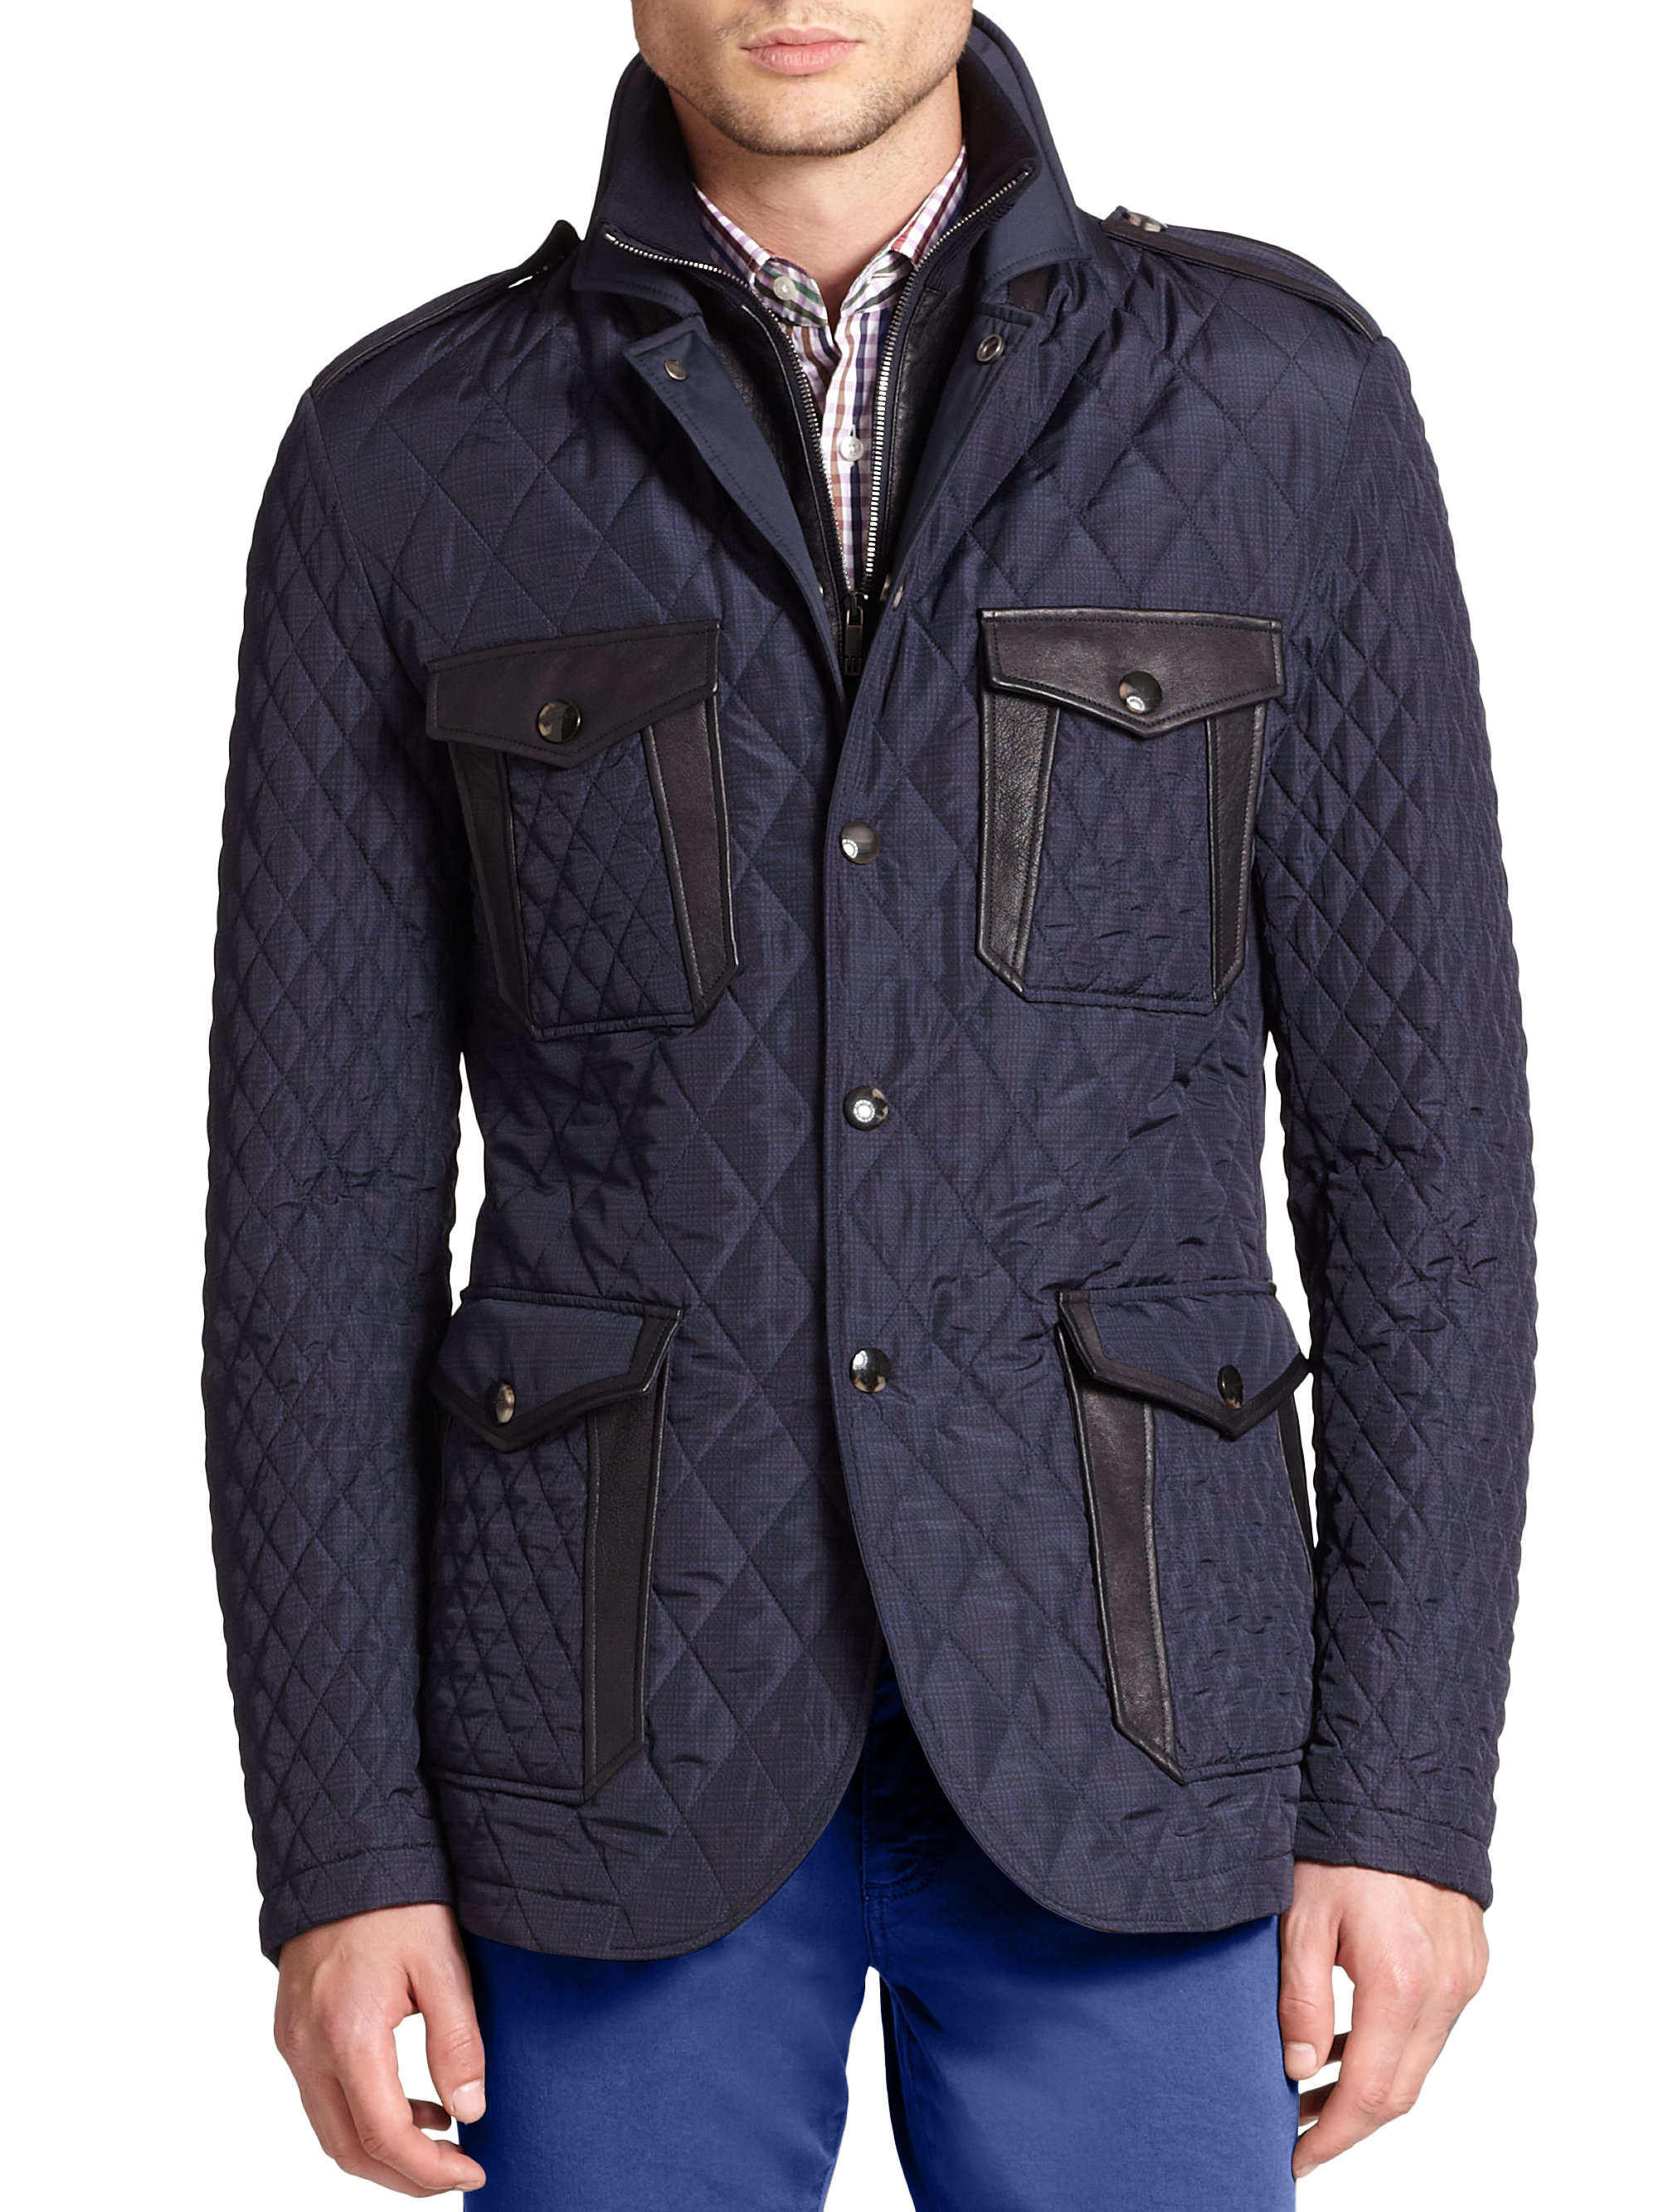 Etro Quilted Safari Jacket in Blue for Men - Lyst